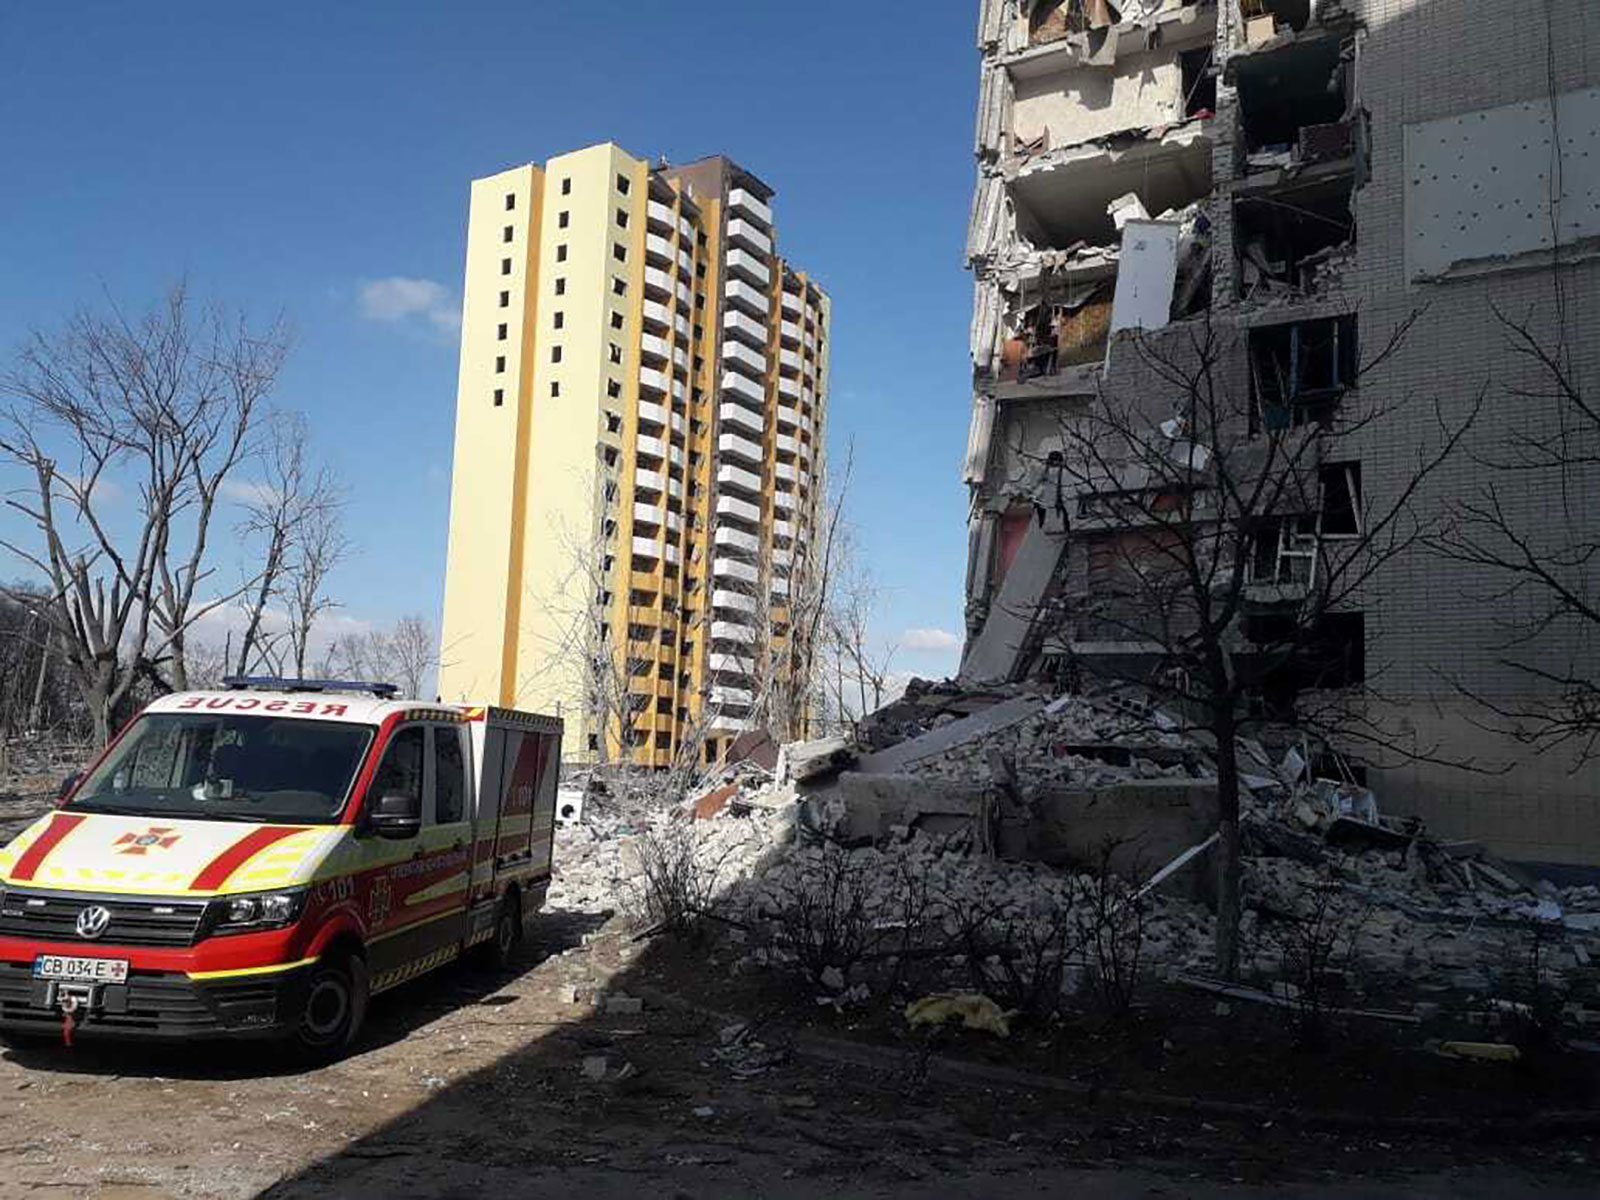 An ambulance stands ready near a damaged residential building in Chernihiv, Ukraine, on Thursday.